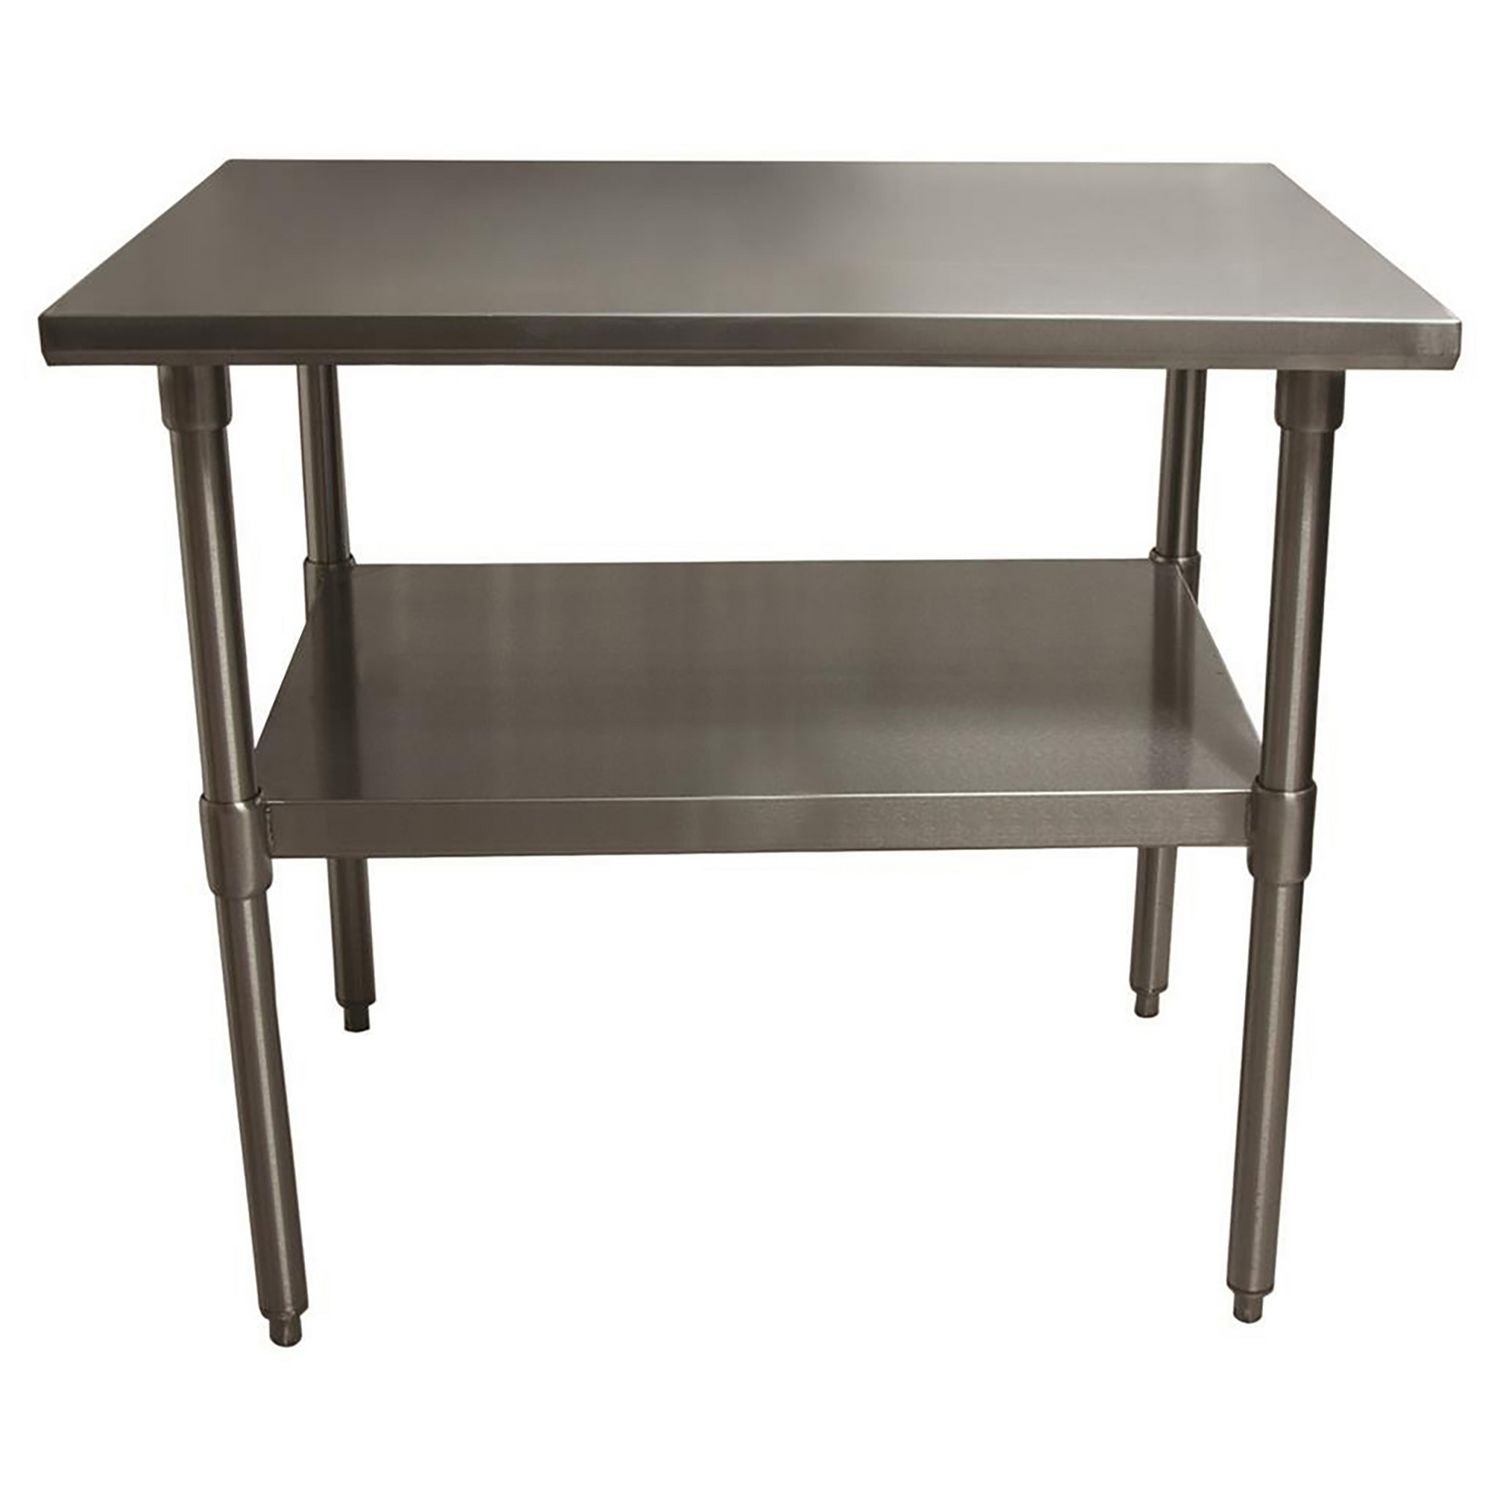 stainless-steel-flat-top-work-tables-48w-x-30d-x-36h-silver-2-pallet-ships-in-4-6-business-days_bke2vt4830 - 7